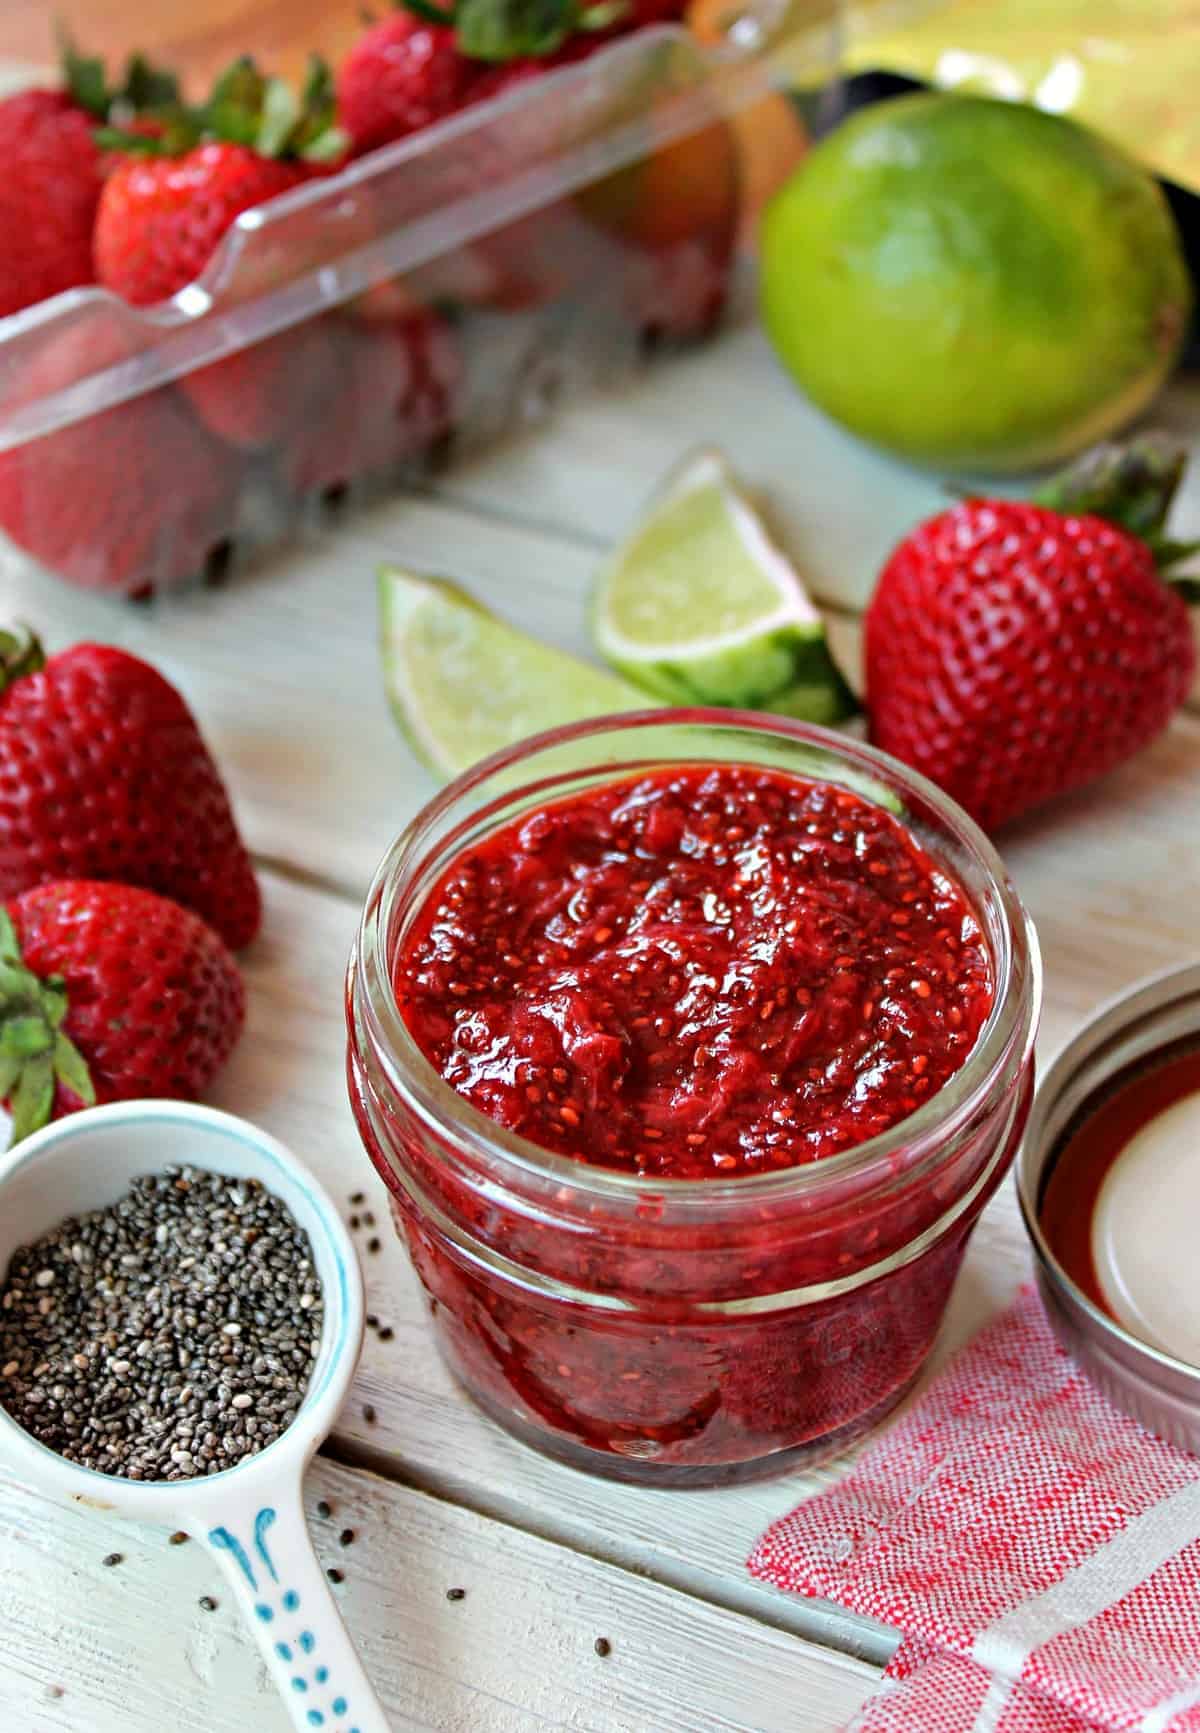 Strawberry Lime Chia Jam! Preserve the sweet, tantalizing flavors of summer with a quick, homemade jam. Chia seeds help thicken and gel this easy jam, so there's no need for pectin or excessive sugar. An easy way to enjoy berries year-round!